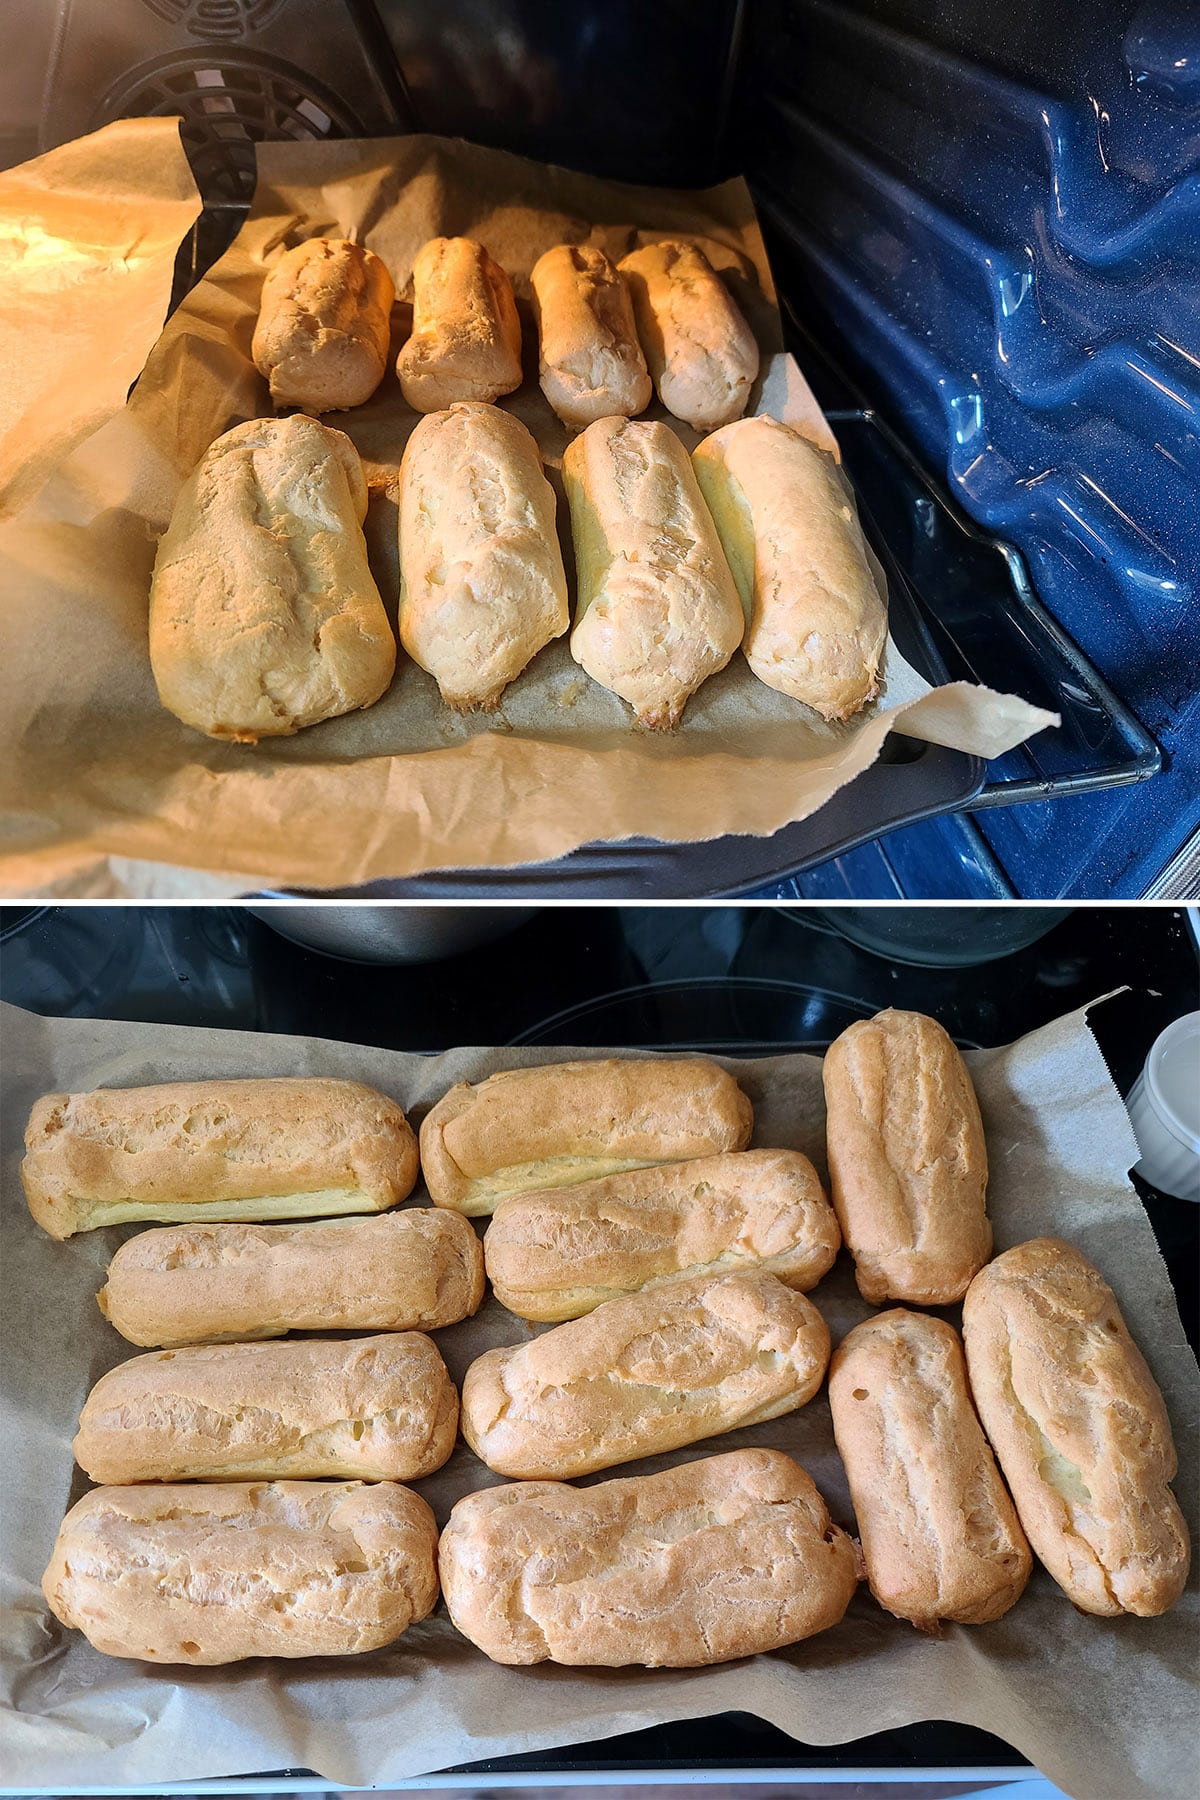 A 2 part image showing baking eclair buns, and a pan of baked eclair shells out of the oven.